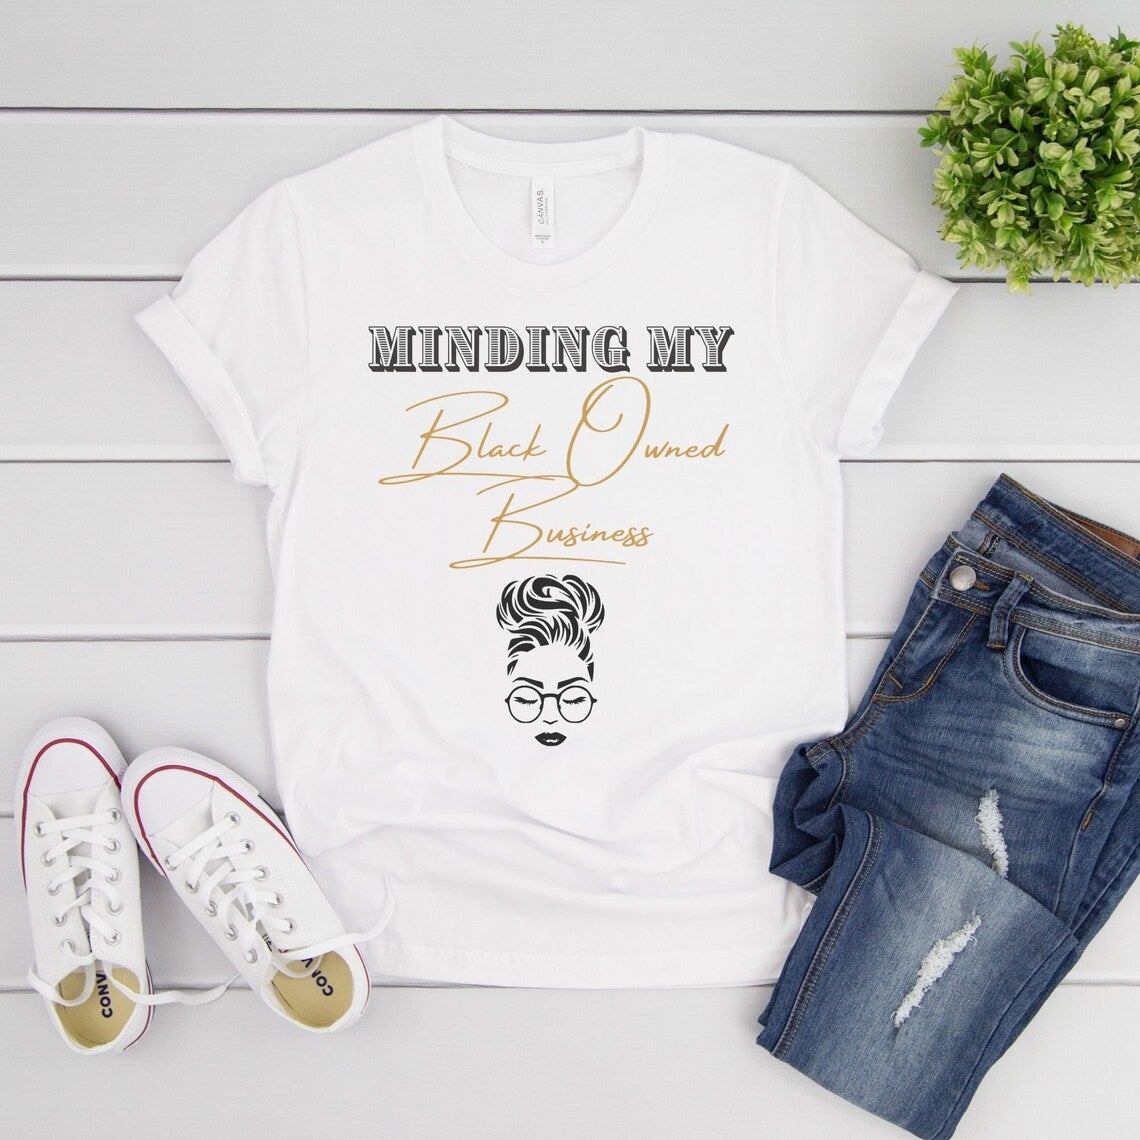 Say It Loud! Embrace Your Blackness With These Fun And Empowering Graphic Tees